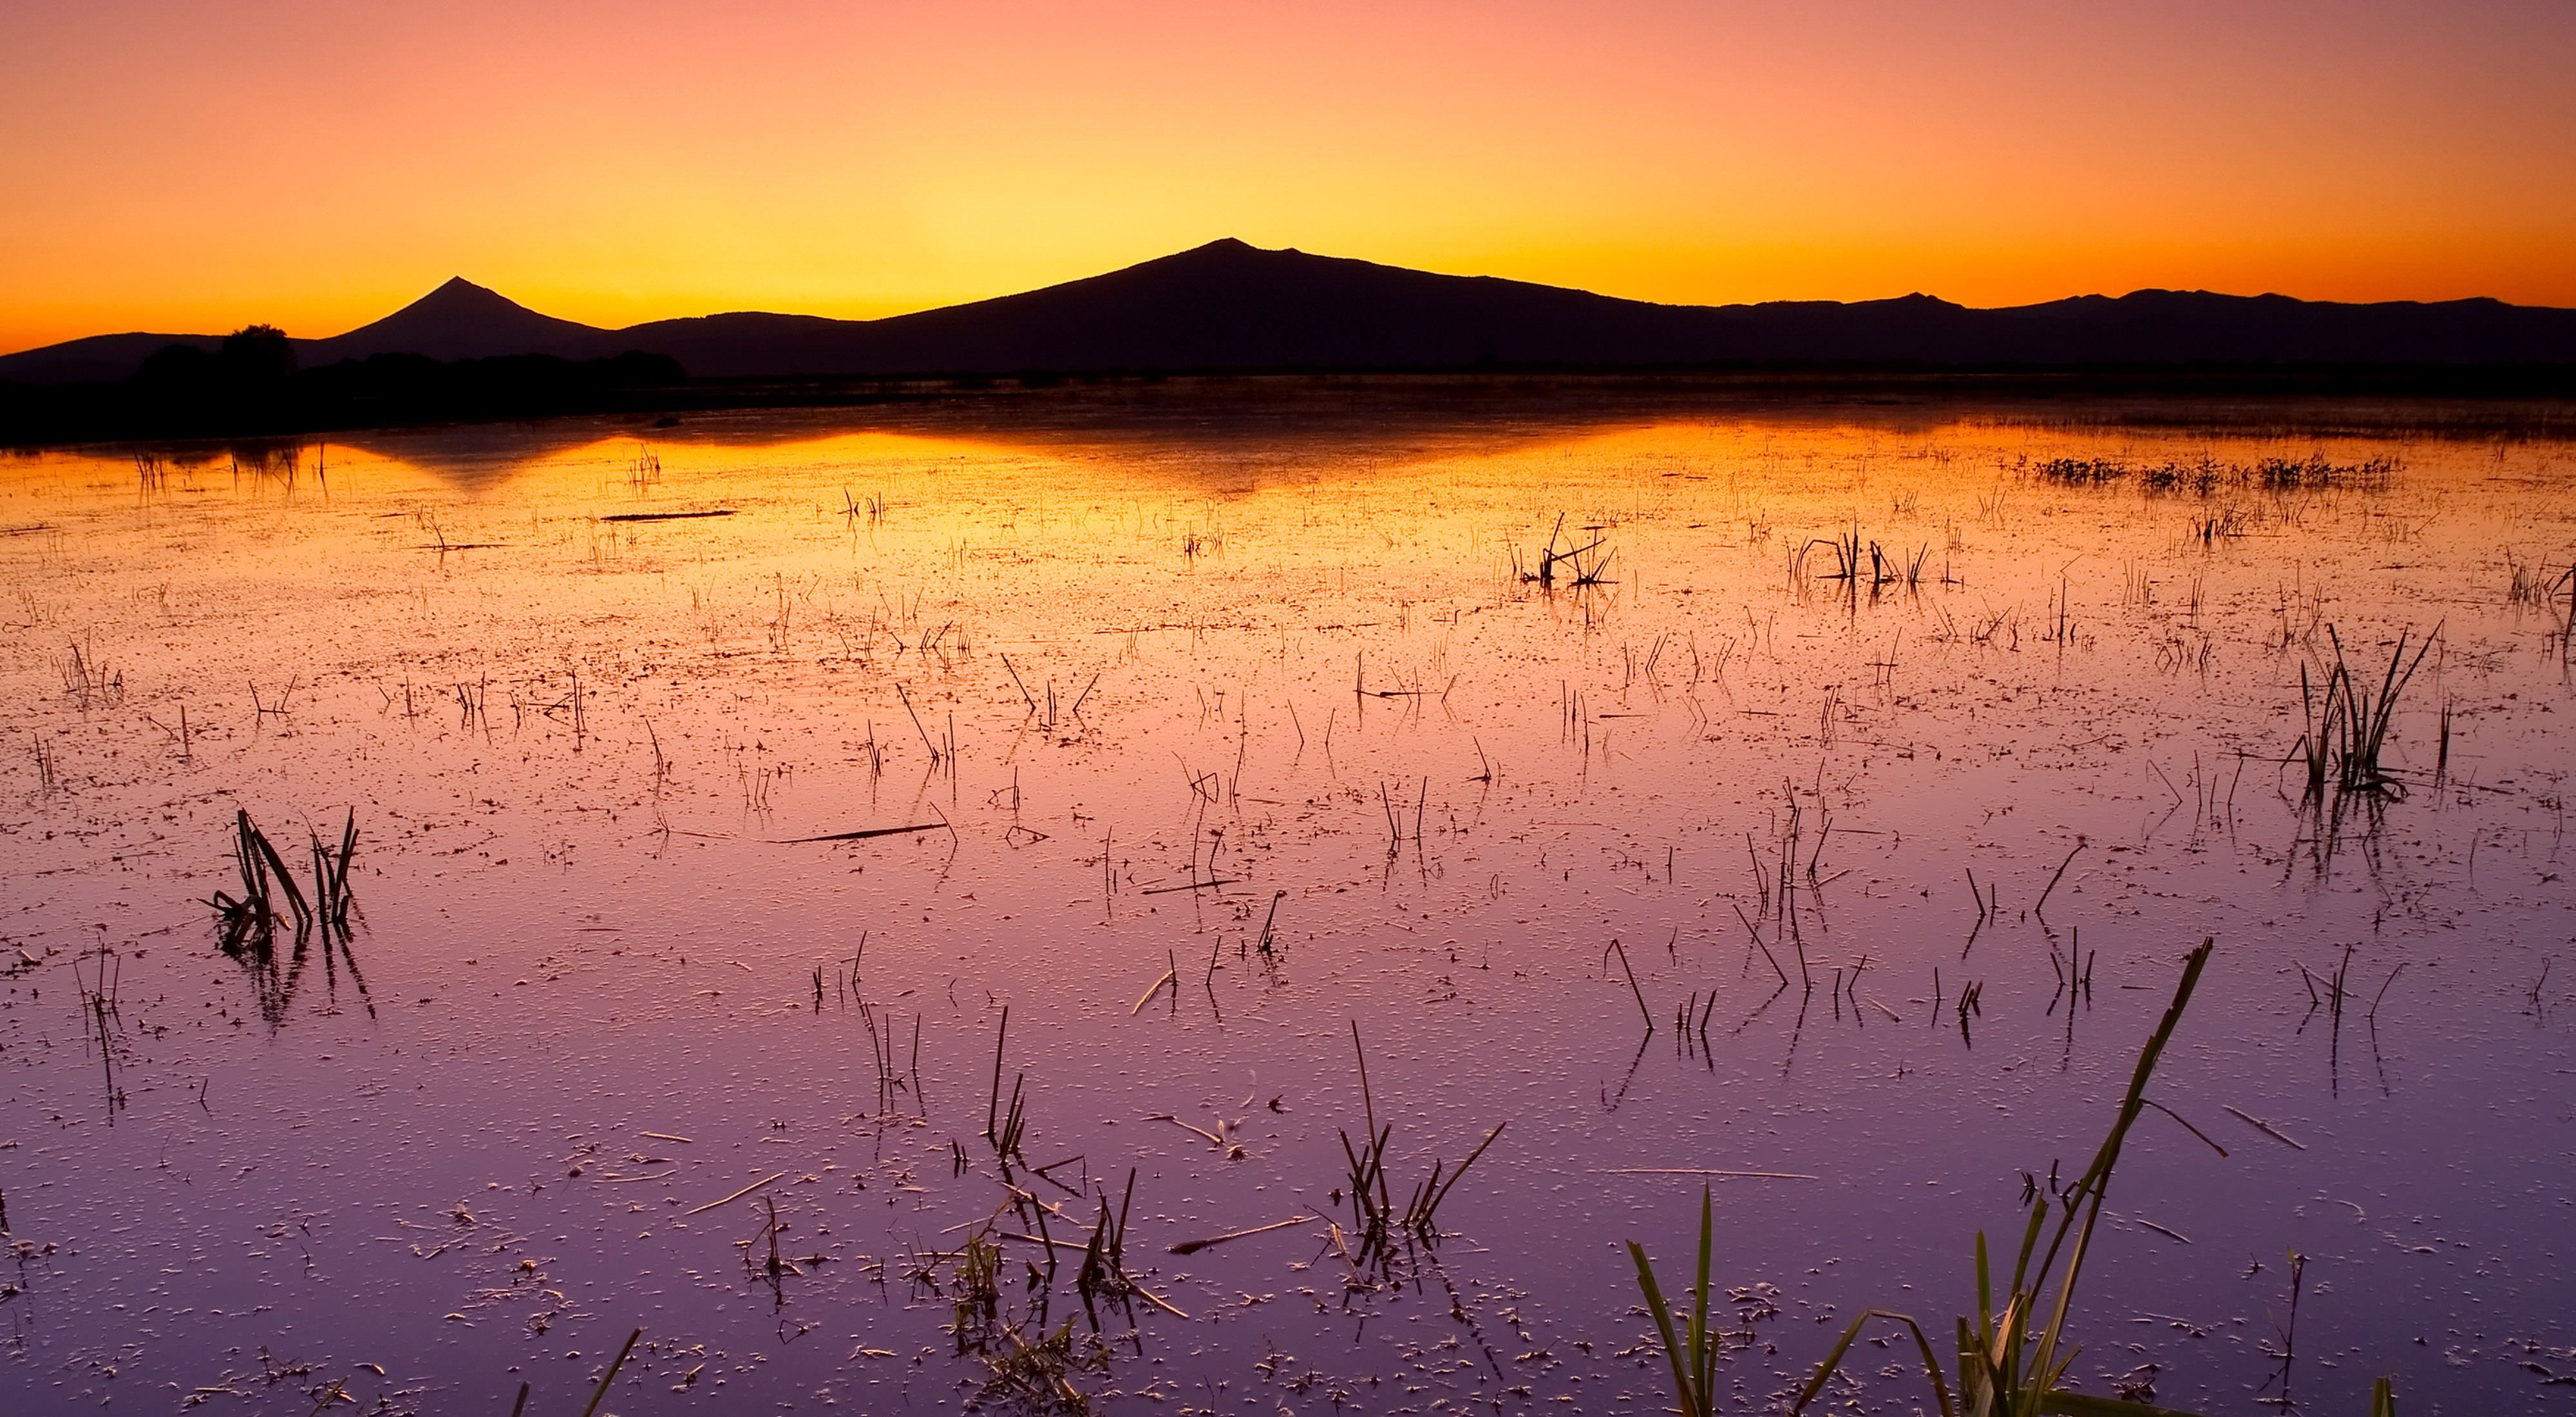 The Williamson River Delta preserve in Oregon's Klamath Basin is considered one of the most pioneering wetland restoration projects in the West.